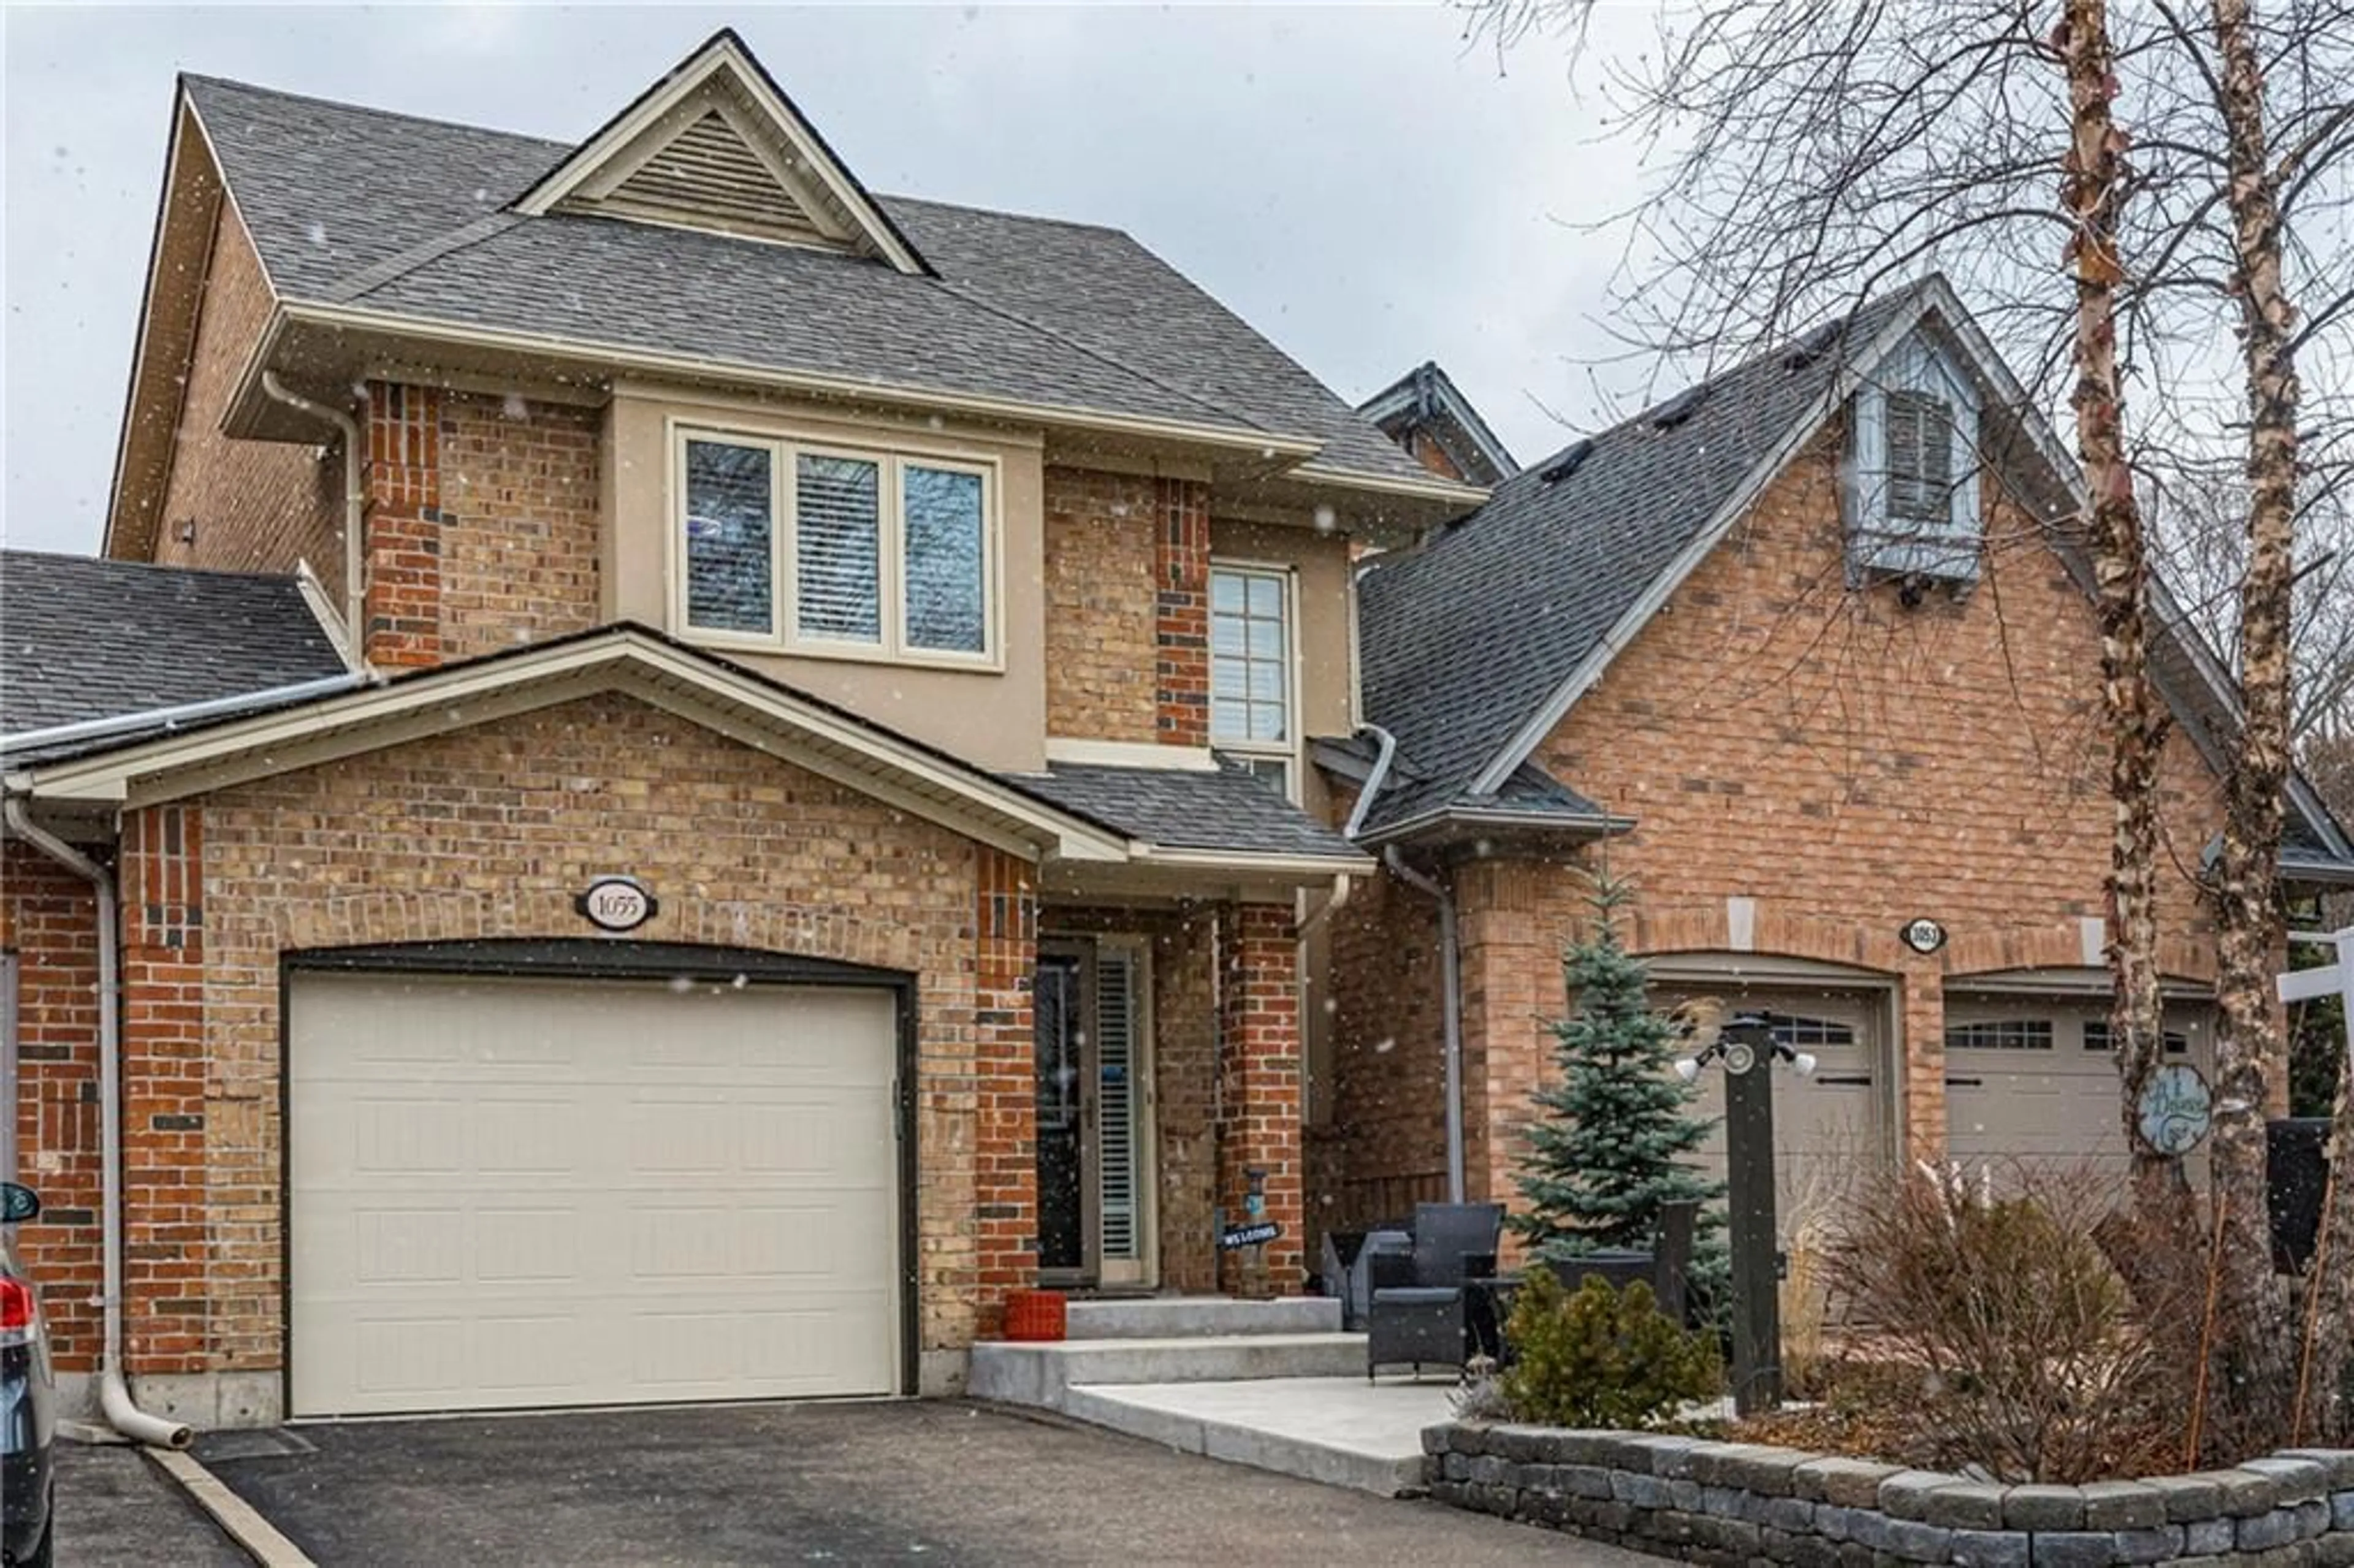 Home with brick exterior material for 1055 Plains View Ave, Burlington Ontario L7T 4B7